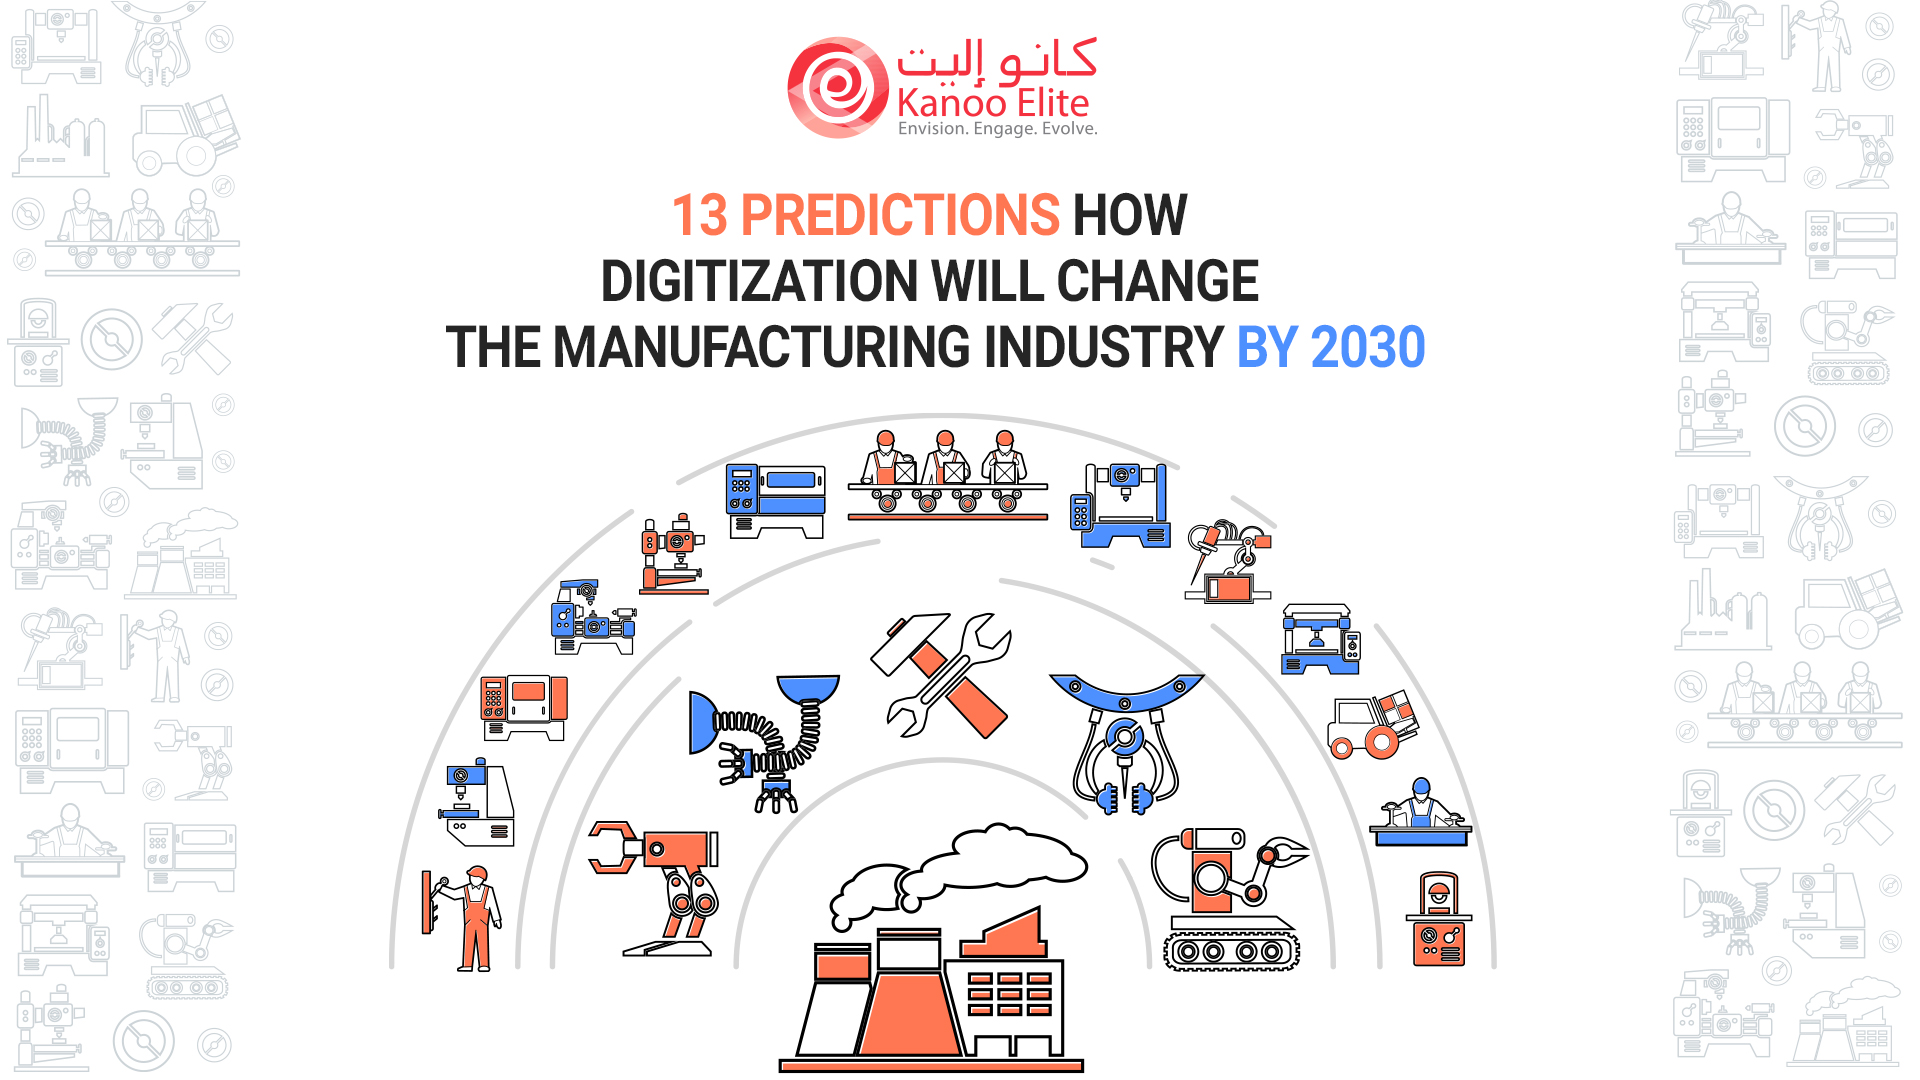 13 Predictions How Digitization Will Change the Manufacturing Industry by 2030